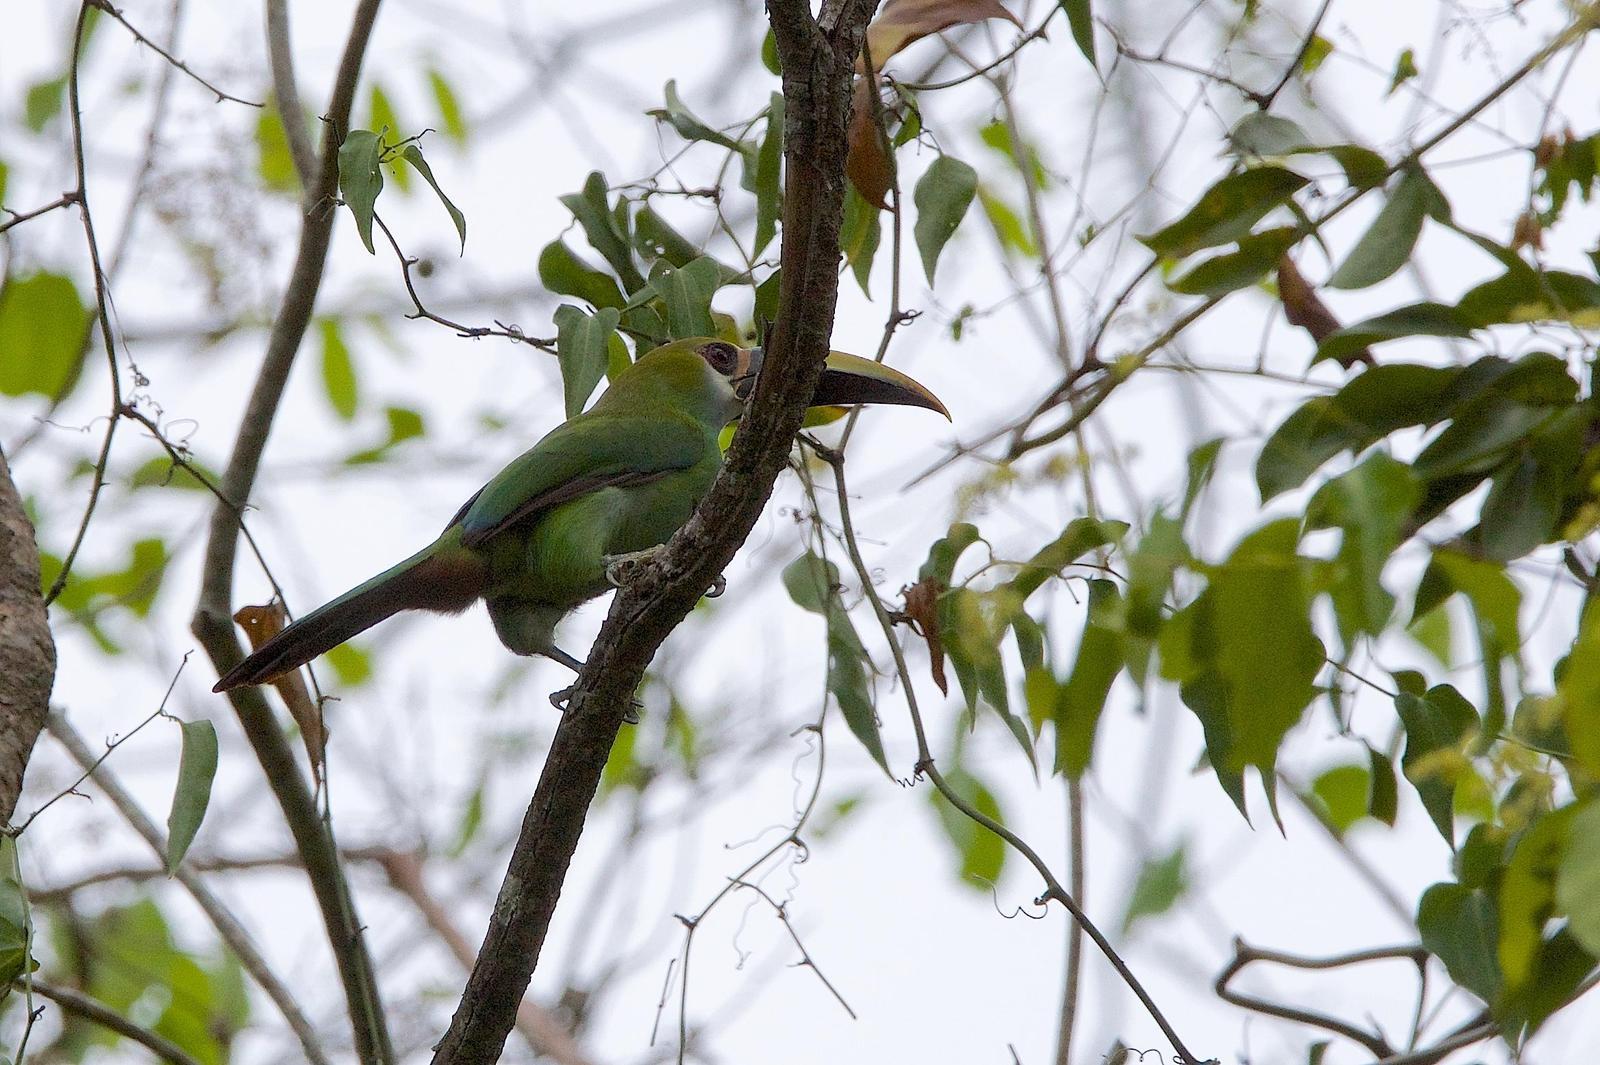 Northern Emerald-Toucanet (Wagler's) Photo by Gerald Hoekstra